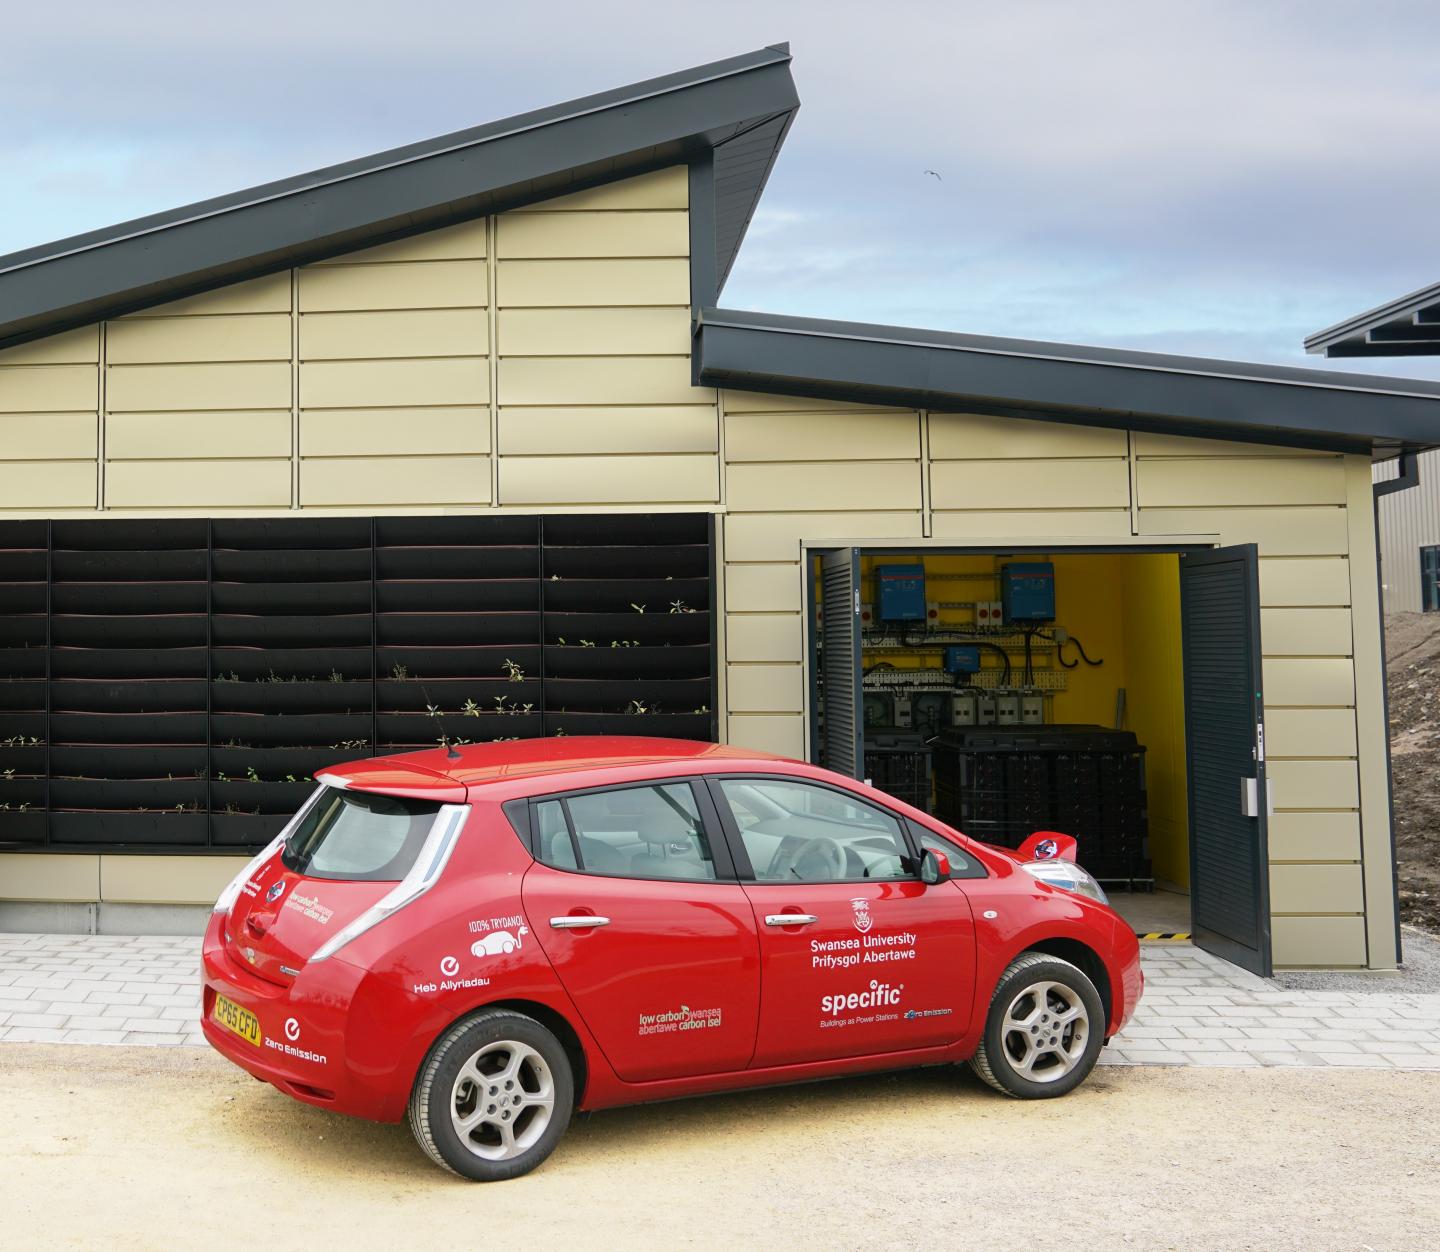 Buildings As Power Stations: An Electric Car Charging Up Using Energy Generated by the Active Classr